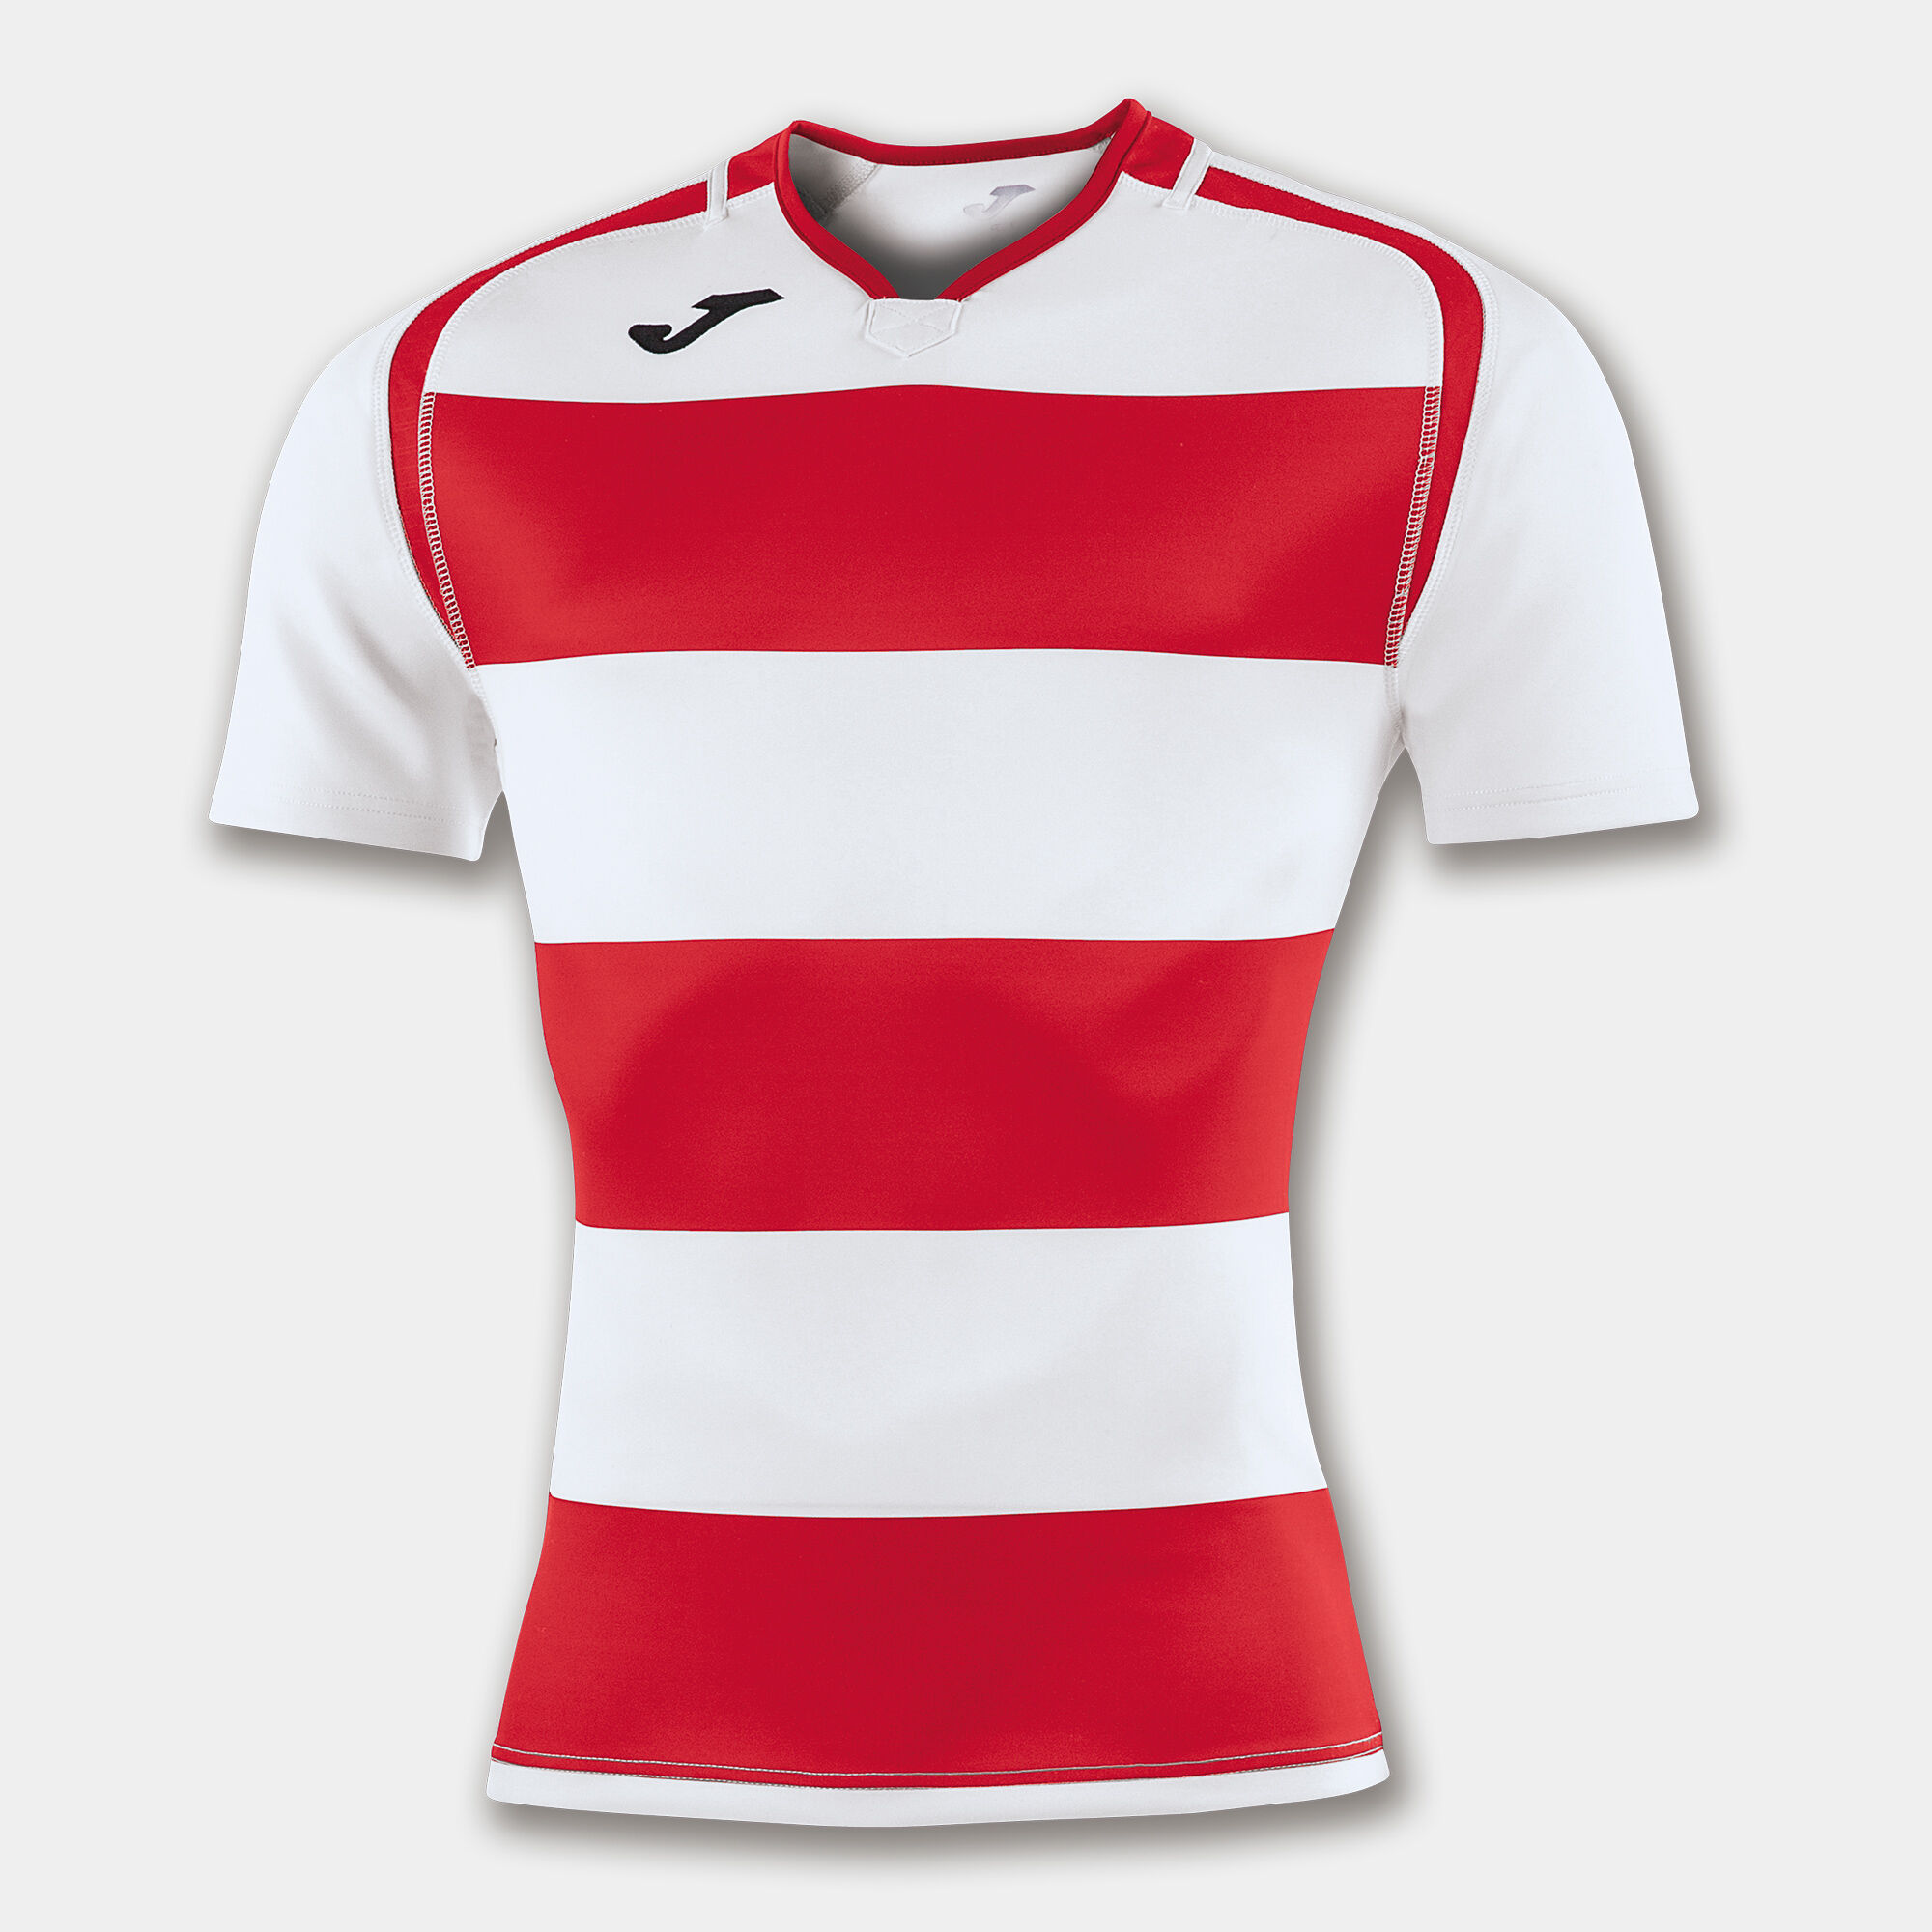 SHIRT SHORT SLEEVE MAN PRORUGBY II RED WHITE